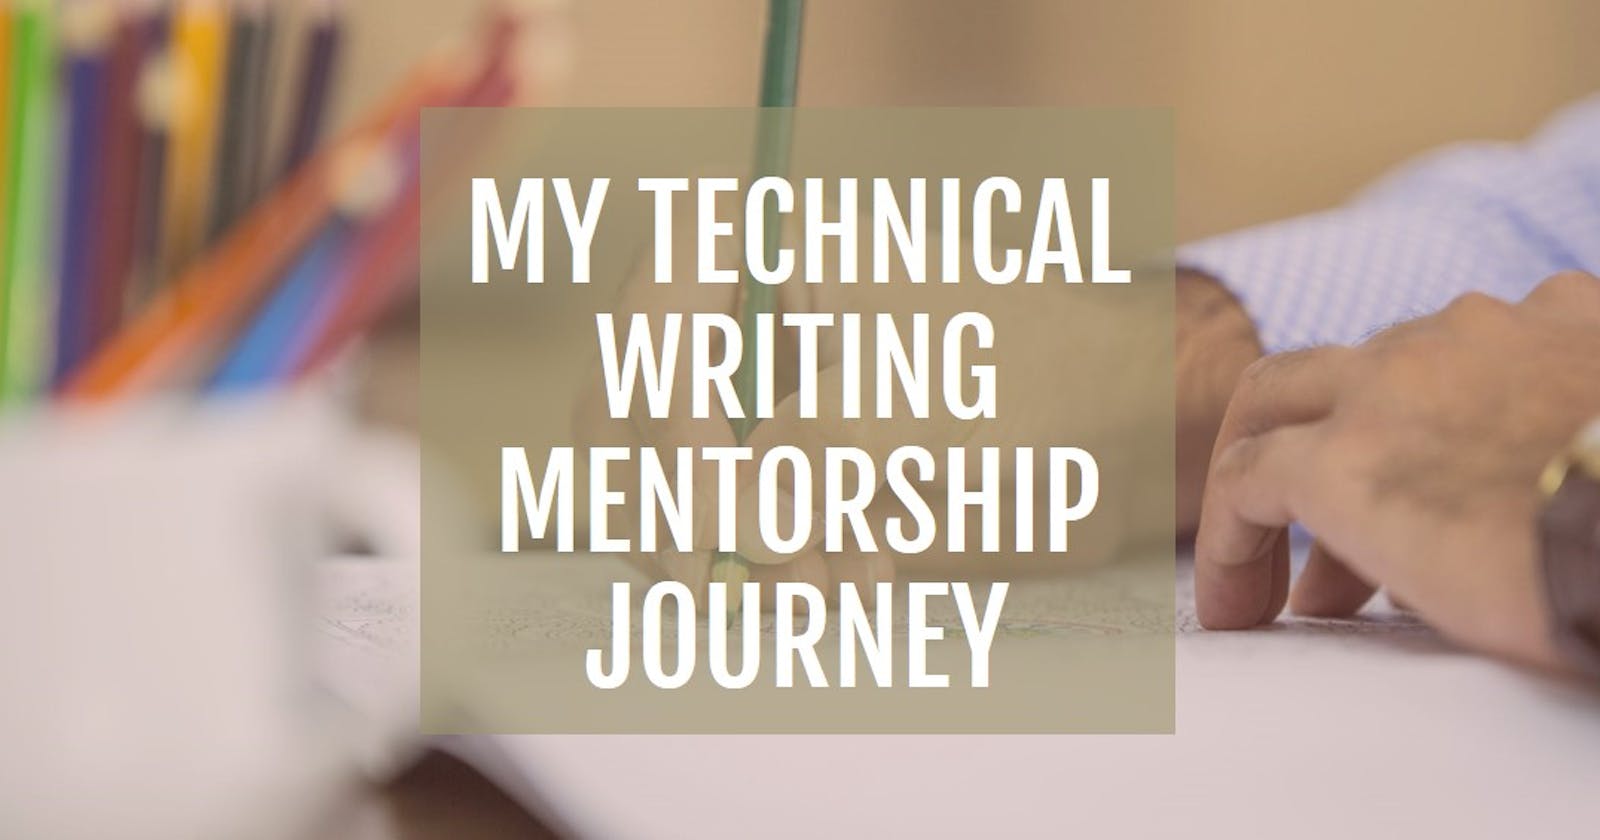 My Experience with Technical Writing Mentorship Program